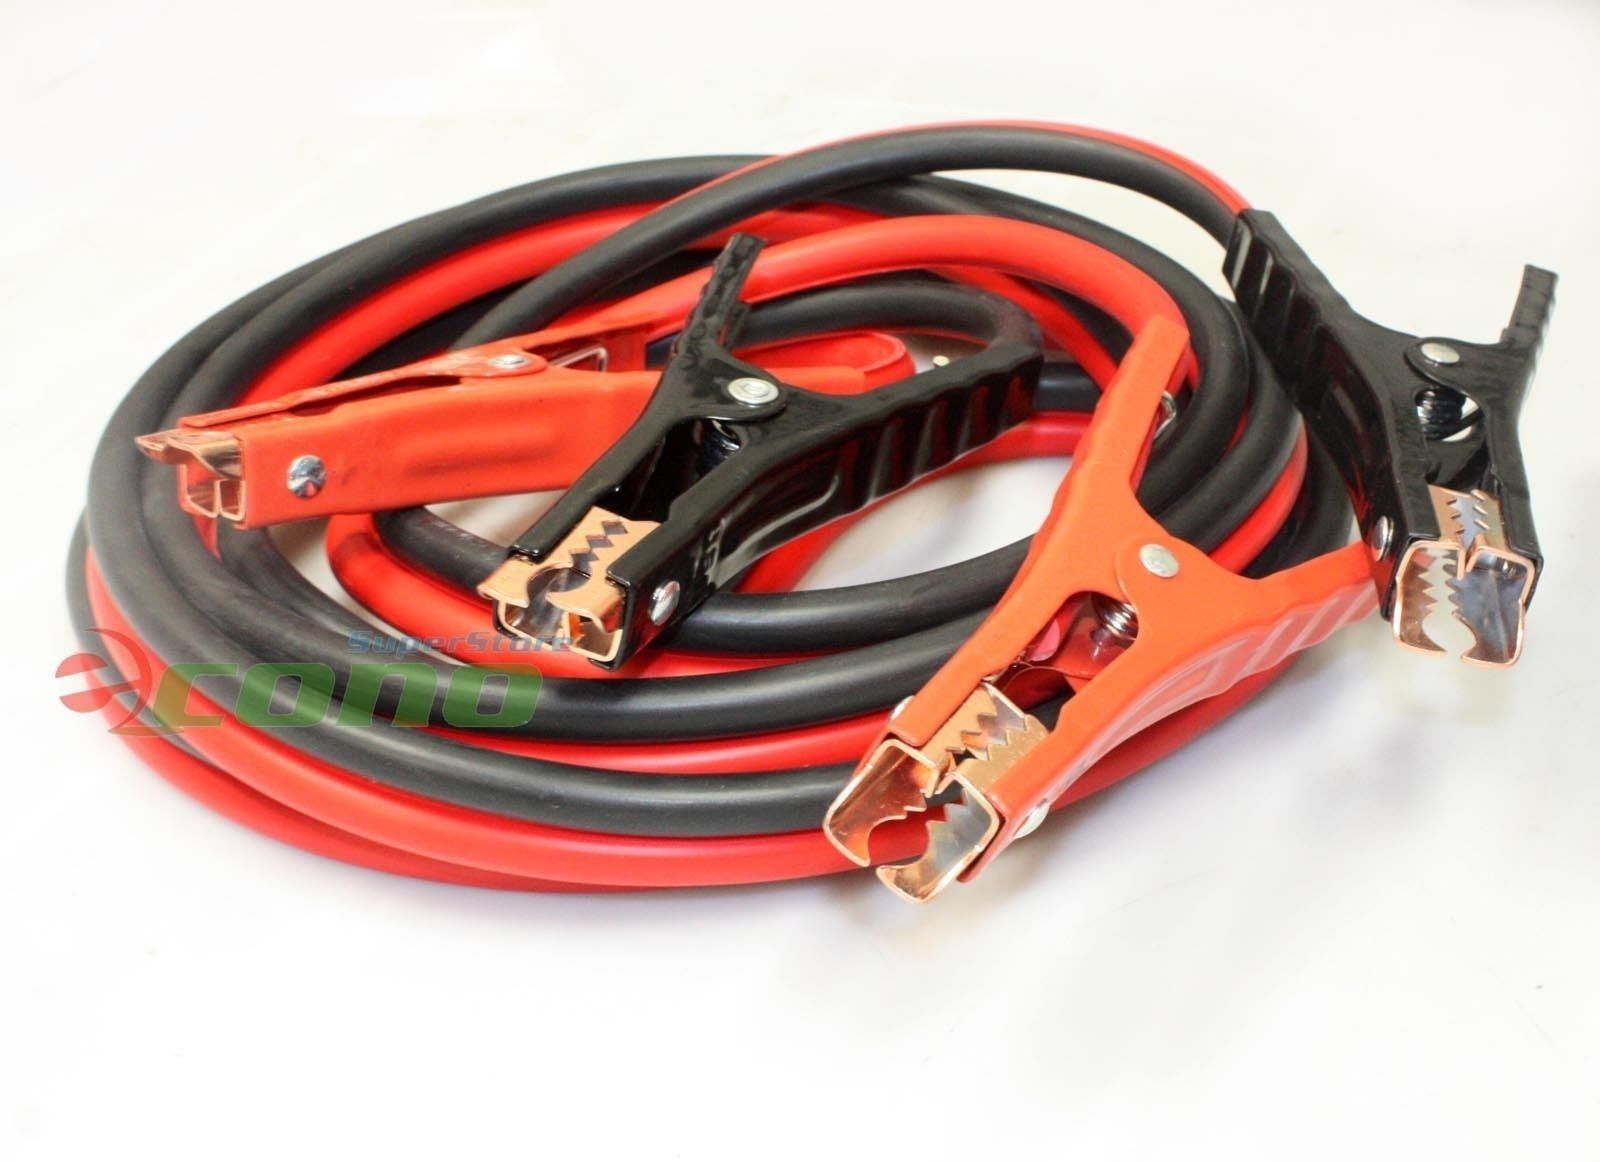 New 16ft Heavy Duty 4 Gauge Booster Jumper Cables Auto Car Jumping Cables 16' 